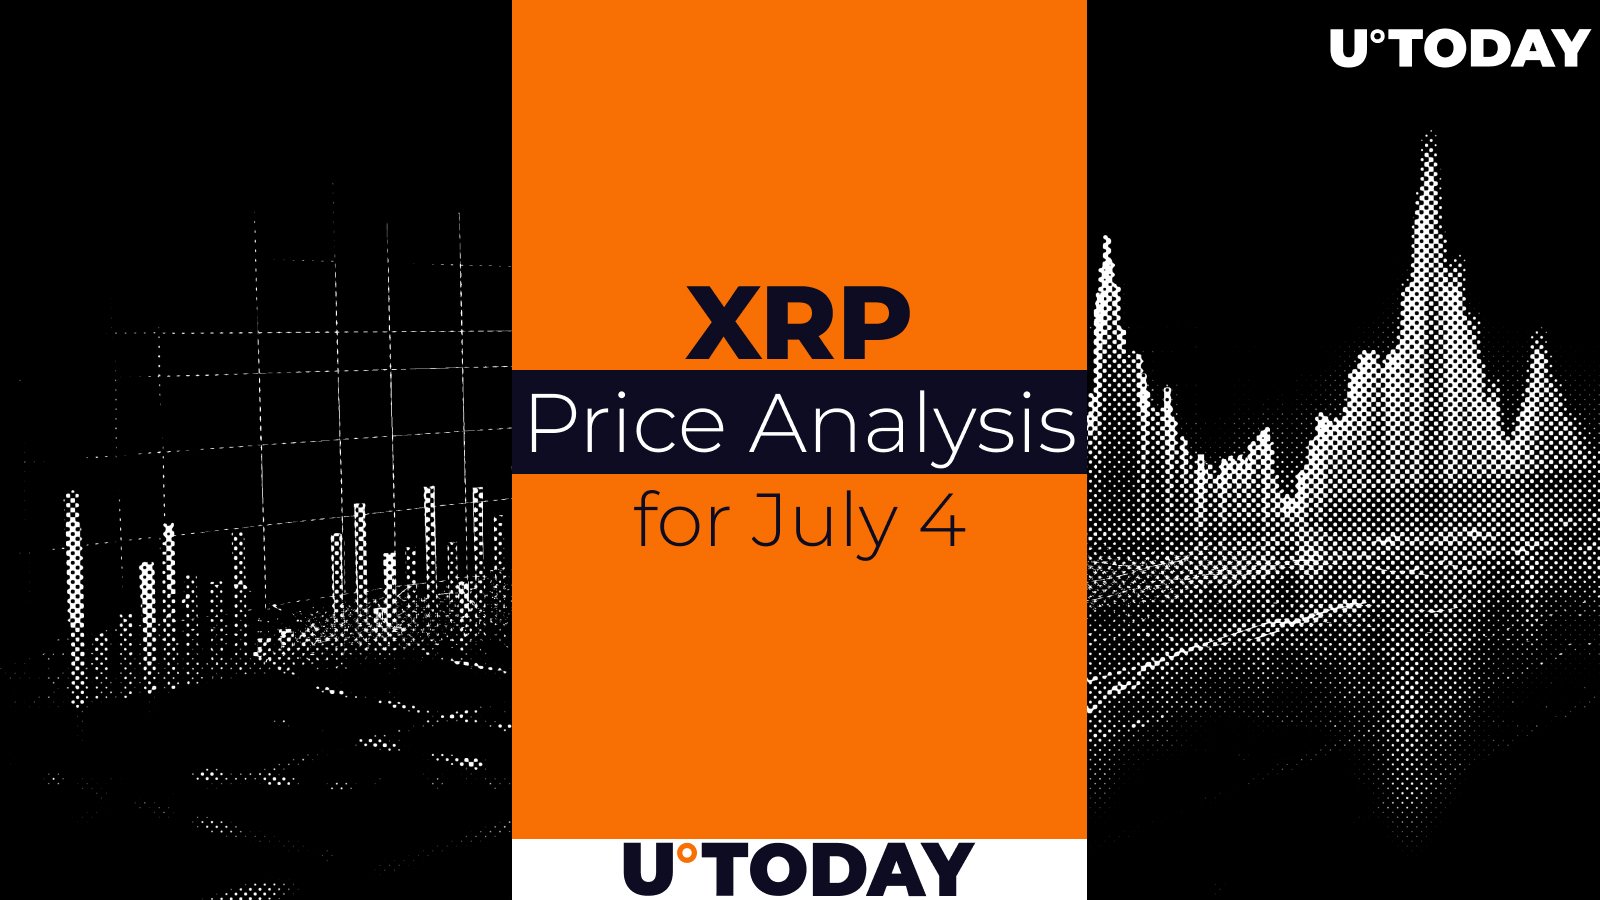 XRP Price Prediction for July 4